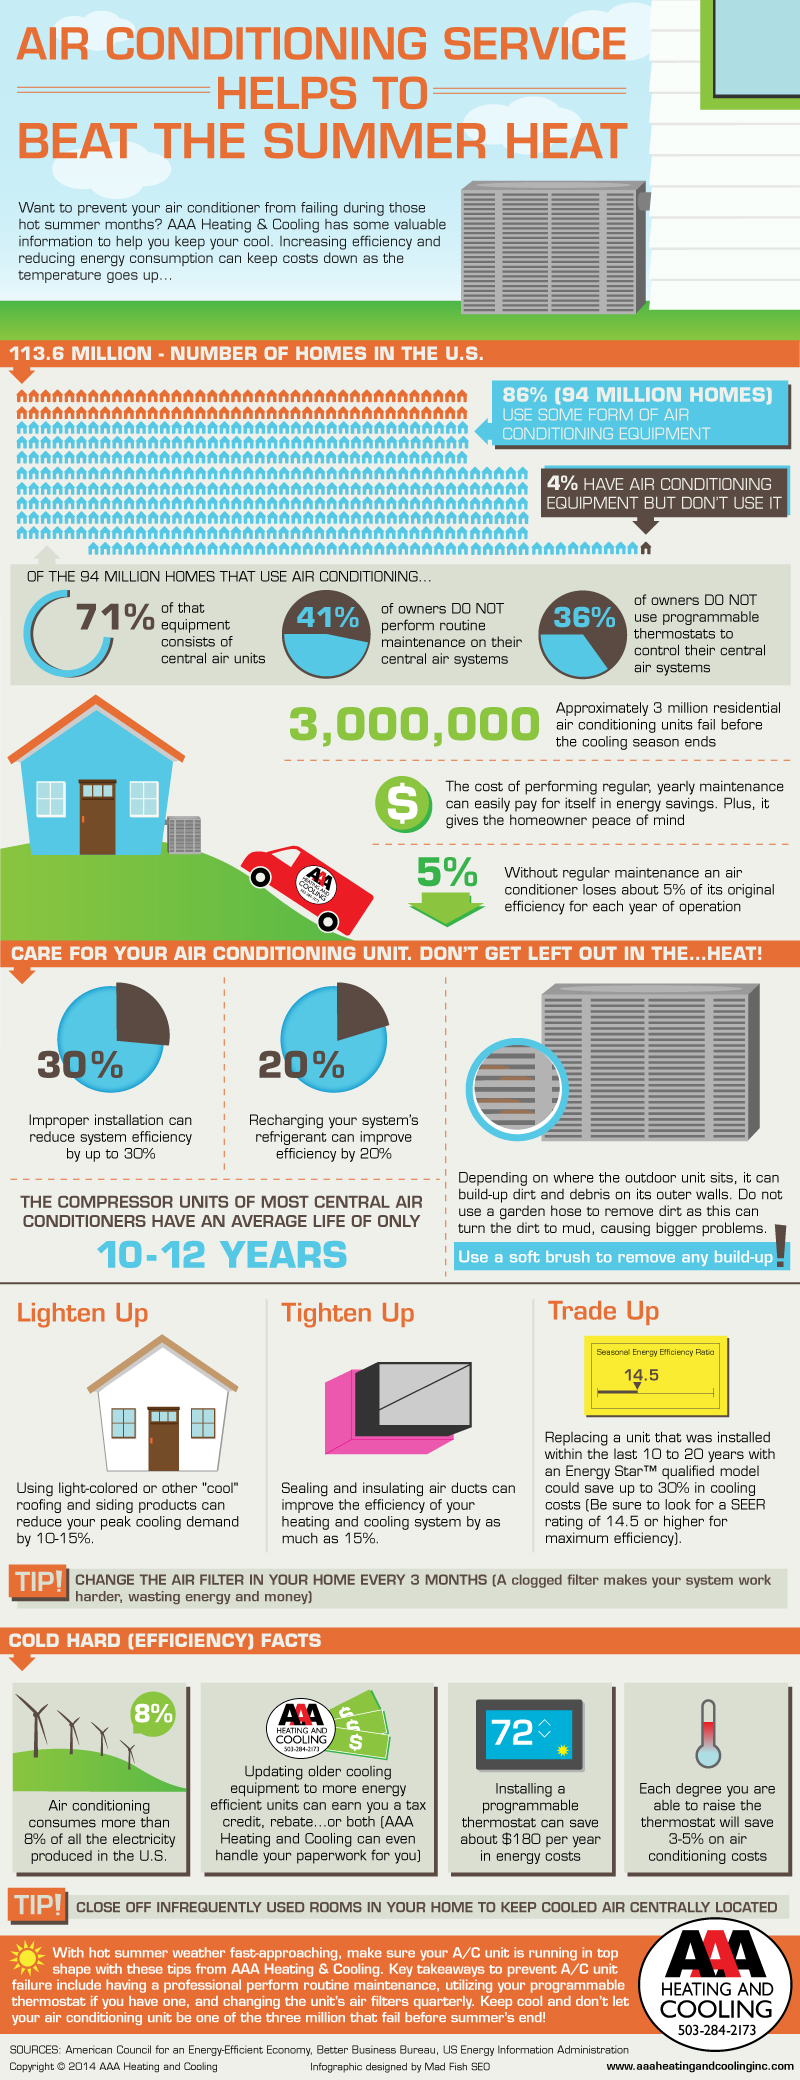 Air conditioning service infographic